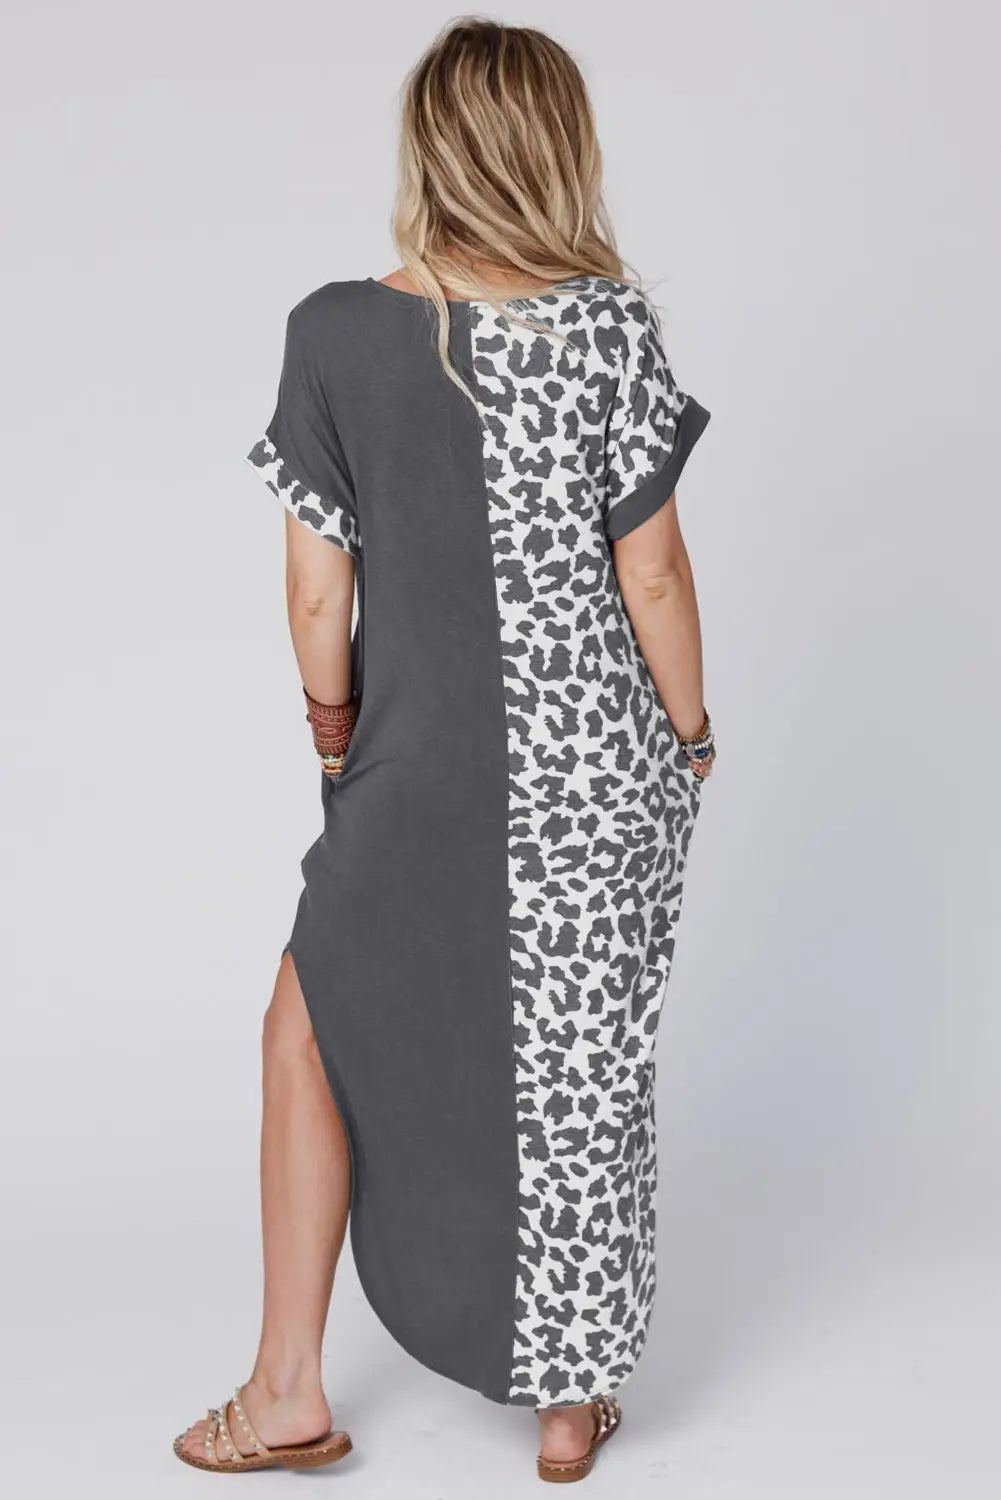 Gray contrast solid leopard short sleeve t - shirt dress with slits - dresses